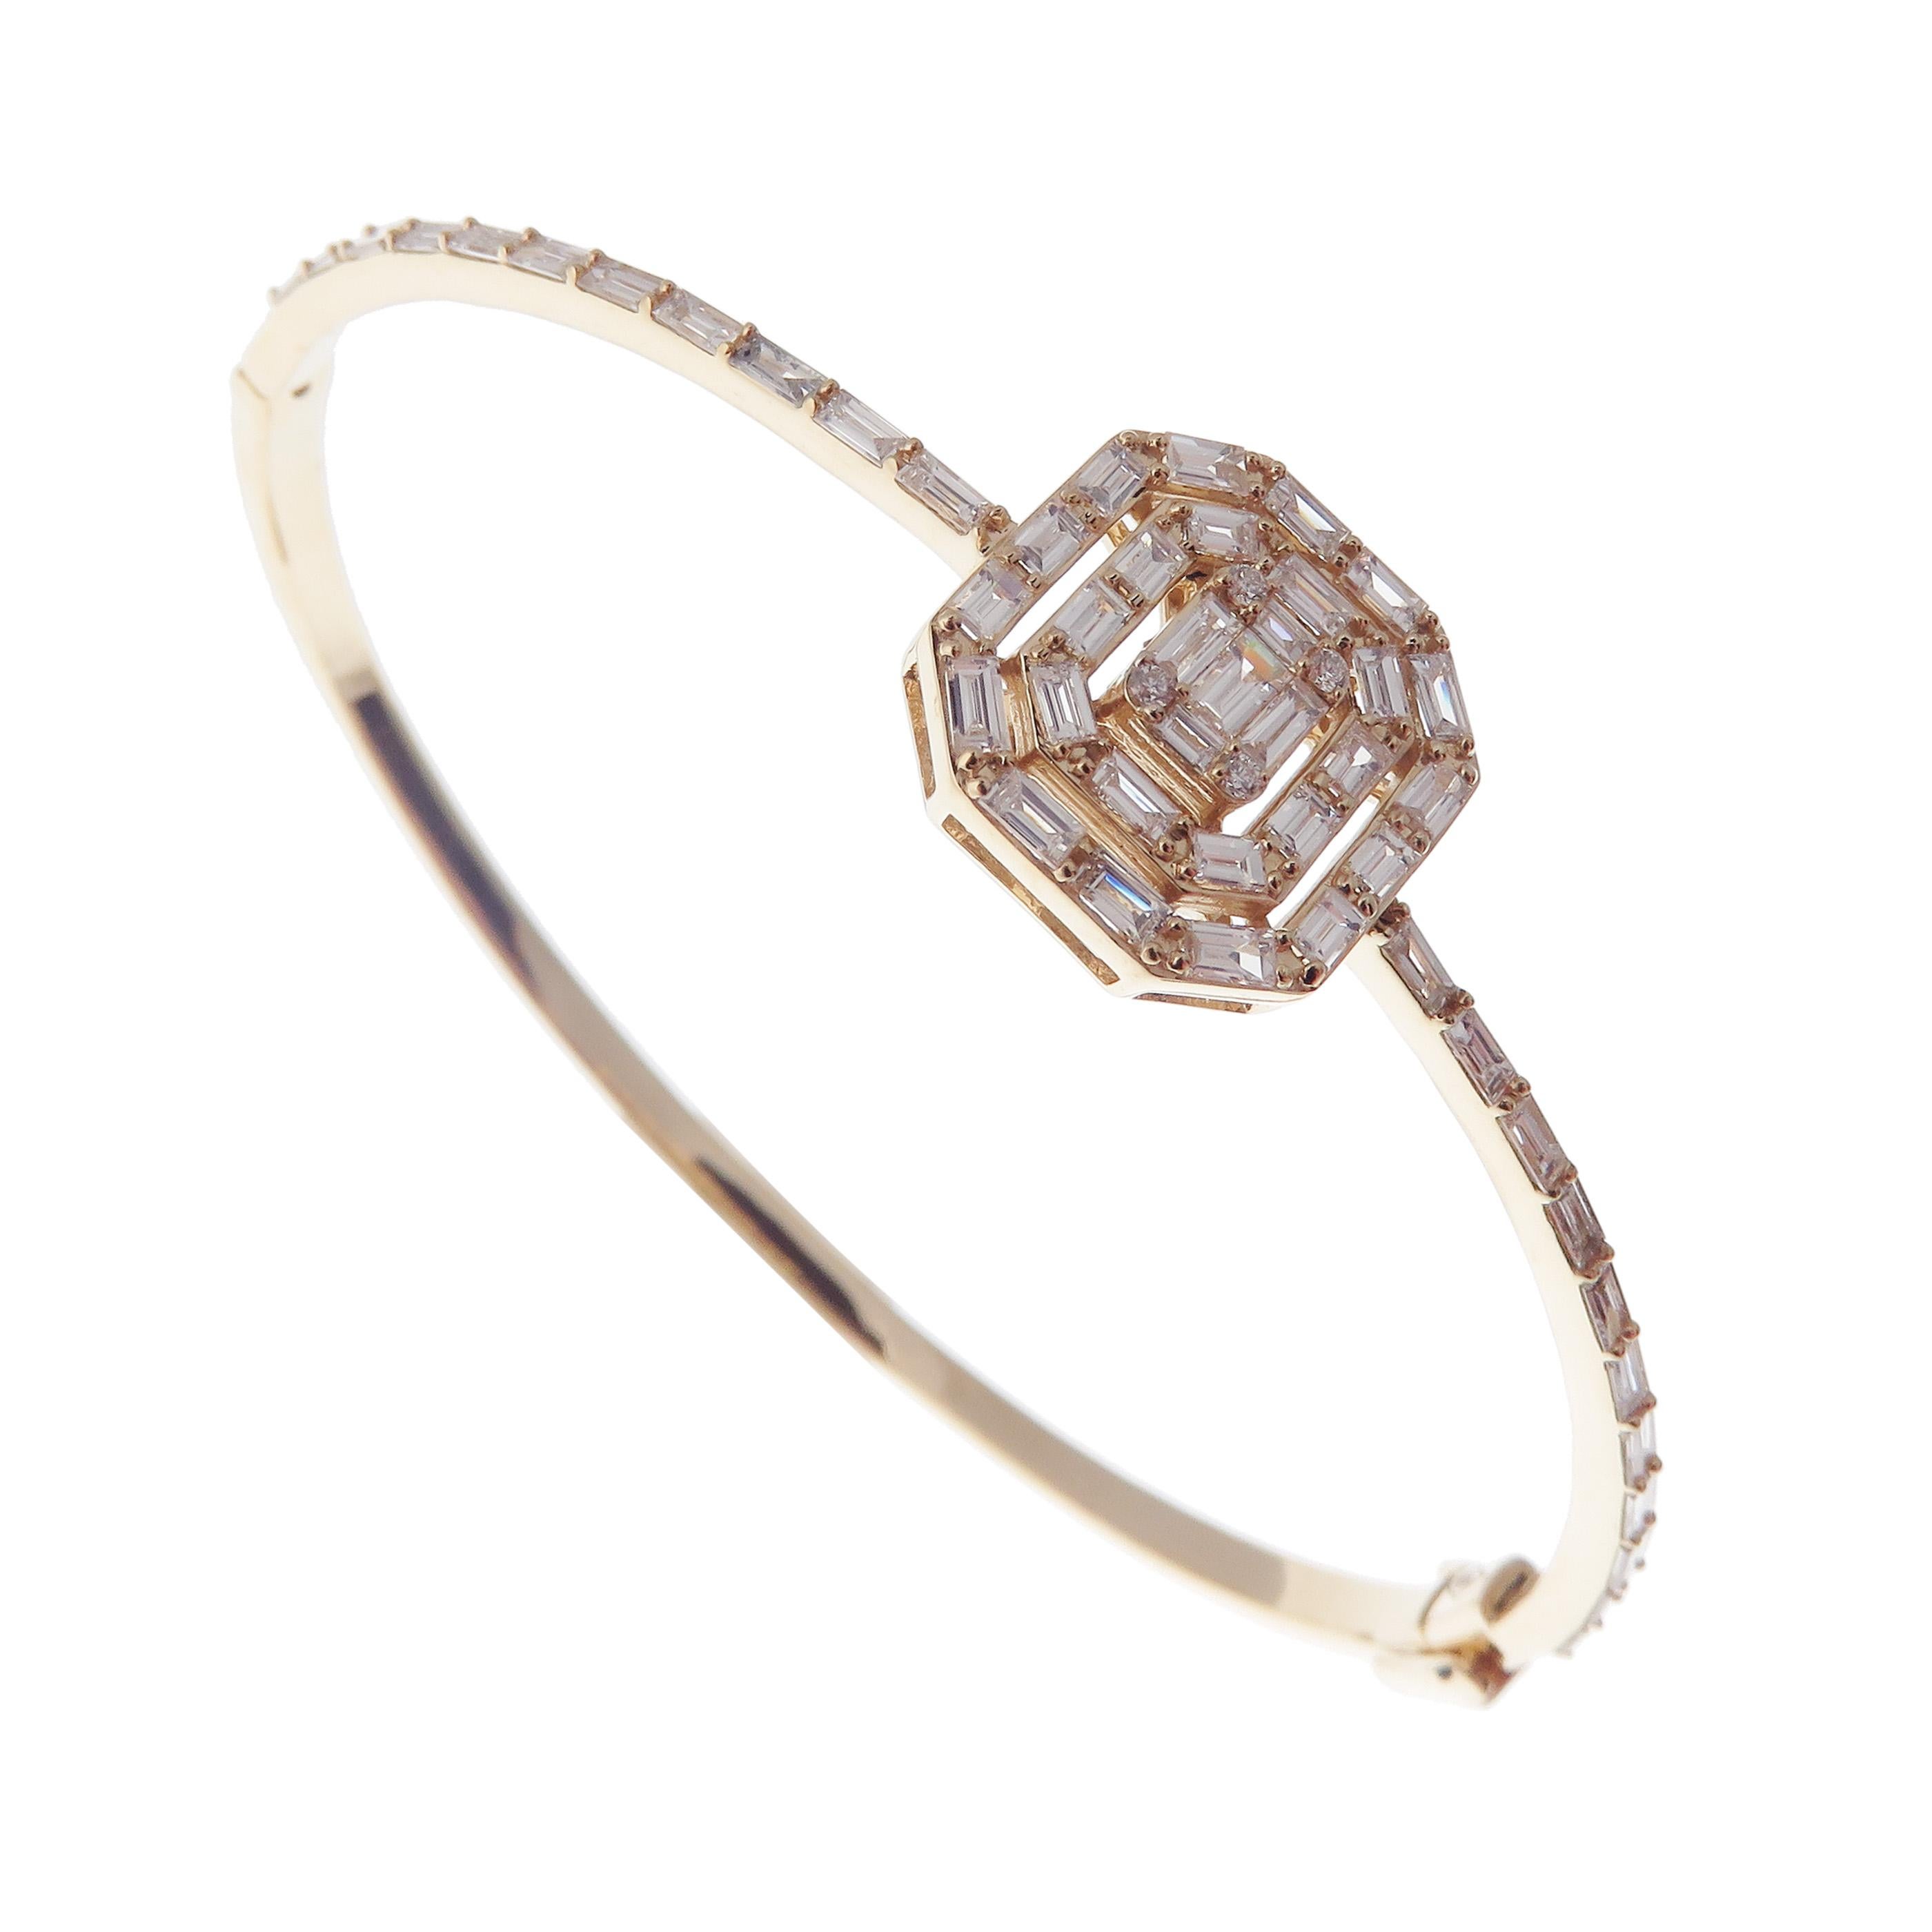 This delicate square bageutte bangle is crafted in 18-karat yellow gold, weighing approximately 1.63 total carats of V-Quality white diamond. Side clasp closure.  

Fits wrists up to 6.75